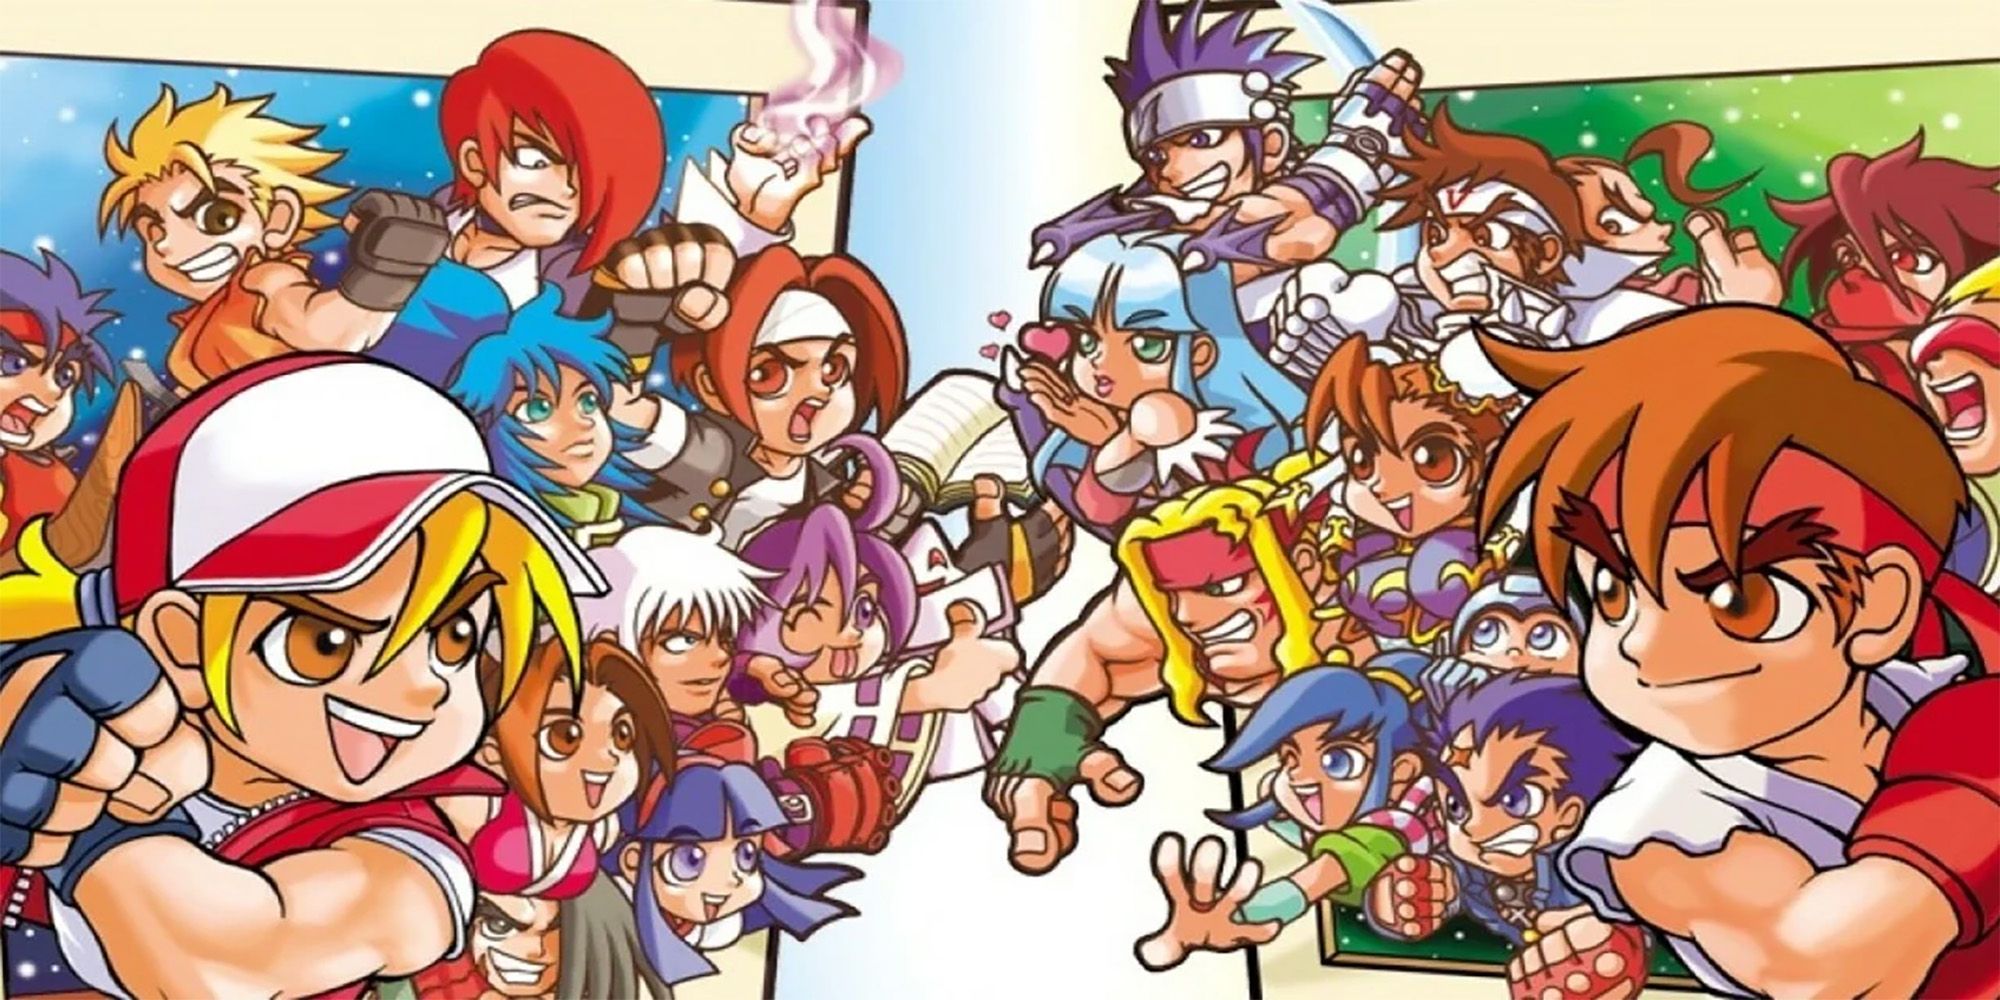 Terry and Ryu lead a plethora of SNK and Capcom characters against each other in SNK VS. Capcom: Card Fighters' Clash.